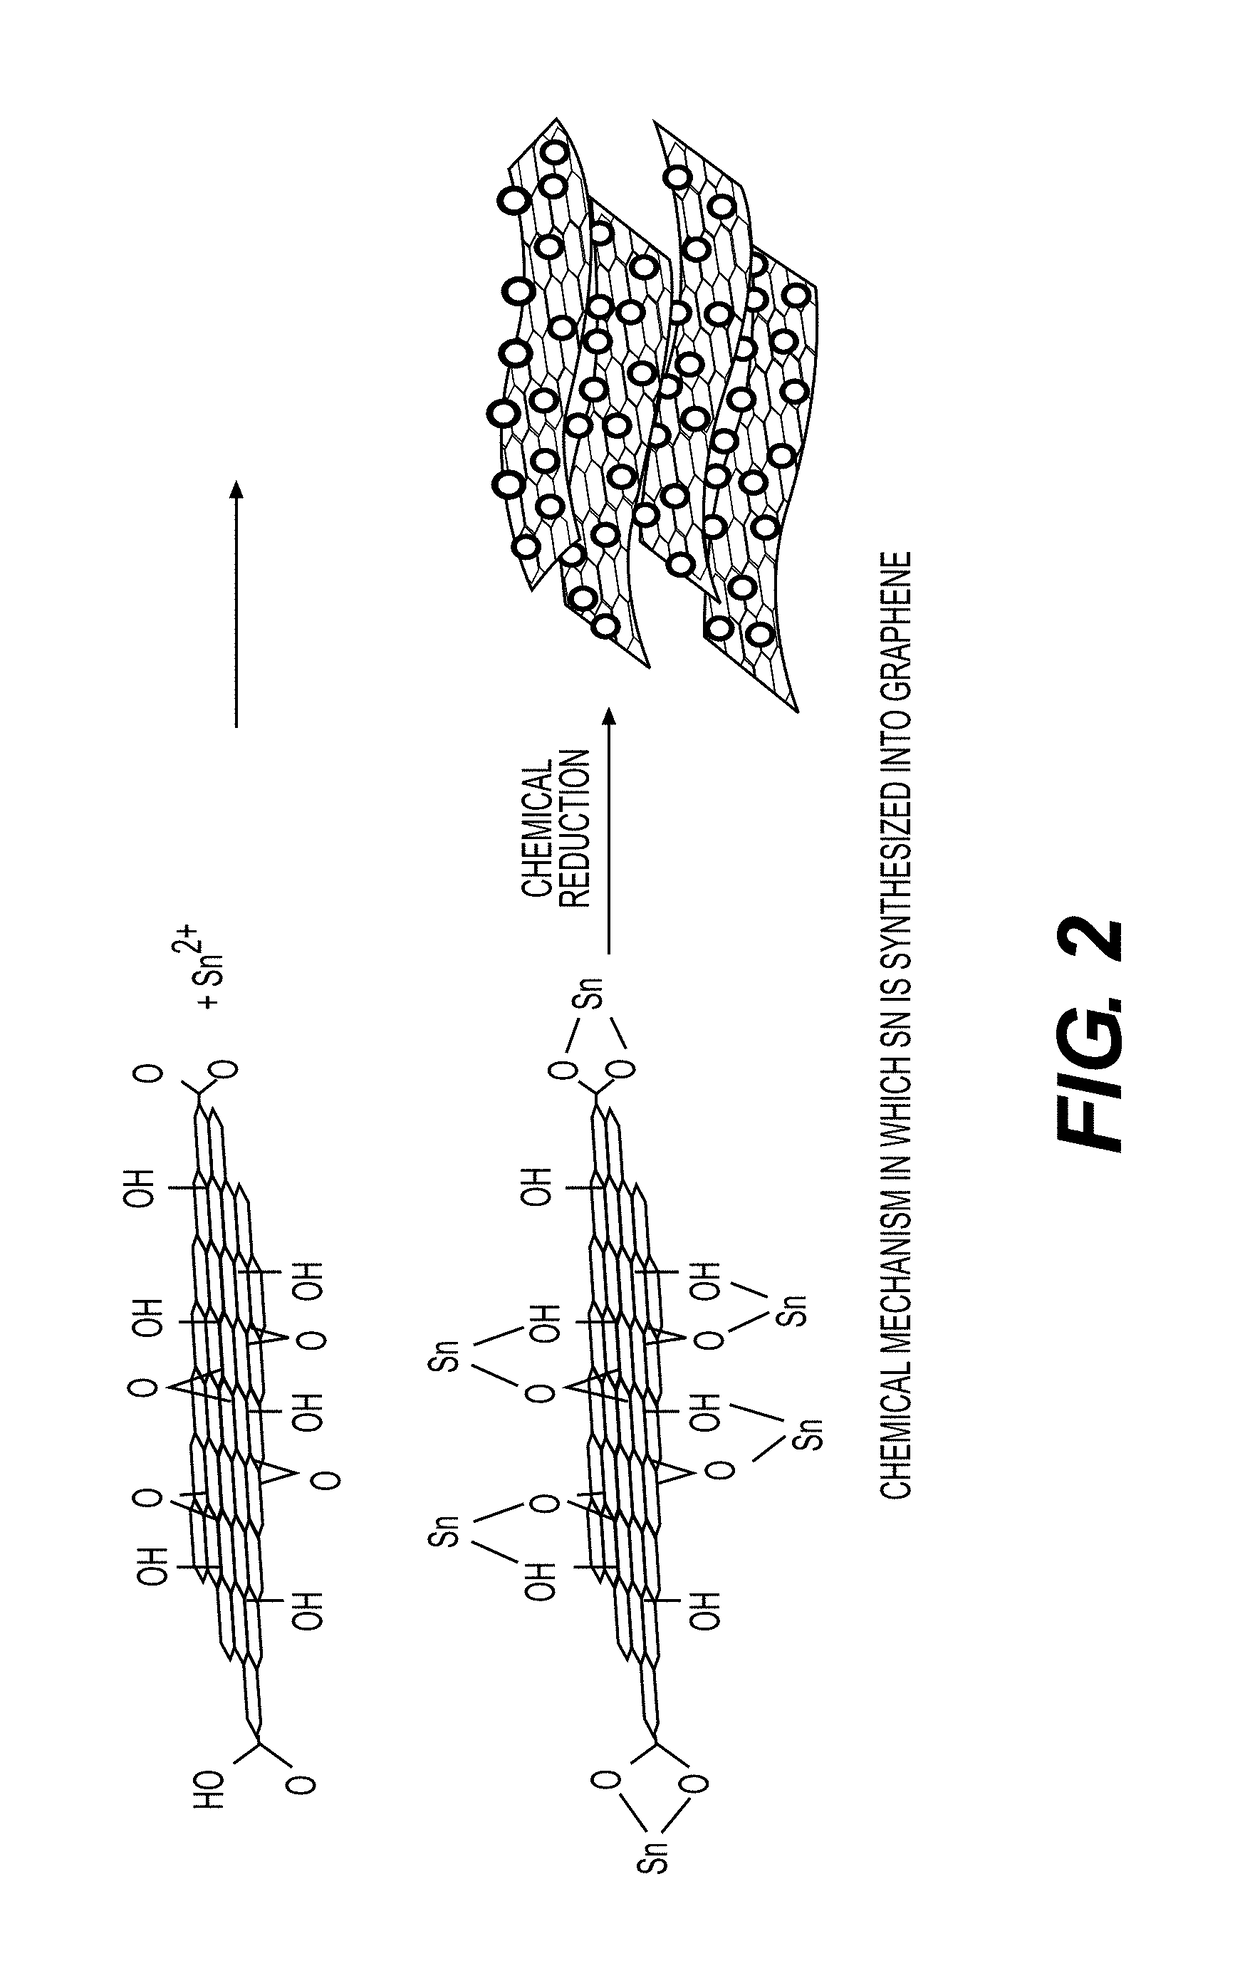 Graphene-nano particle composite having nano particles crystallized therein at a high density